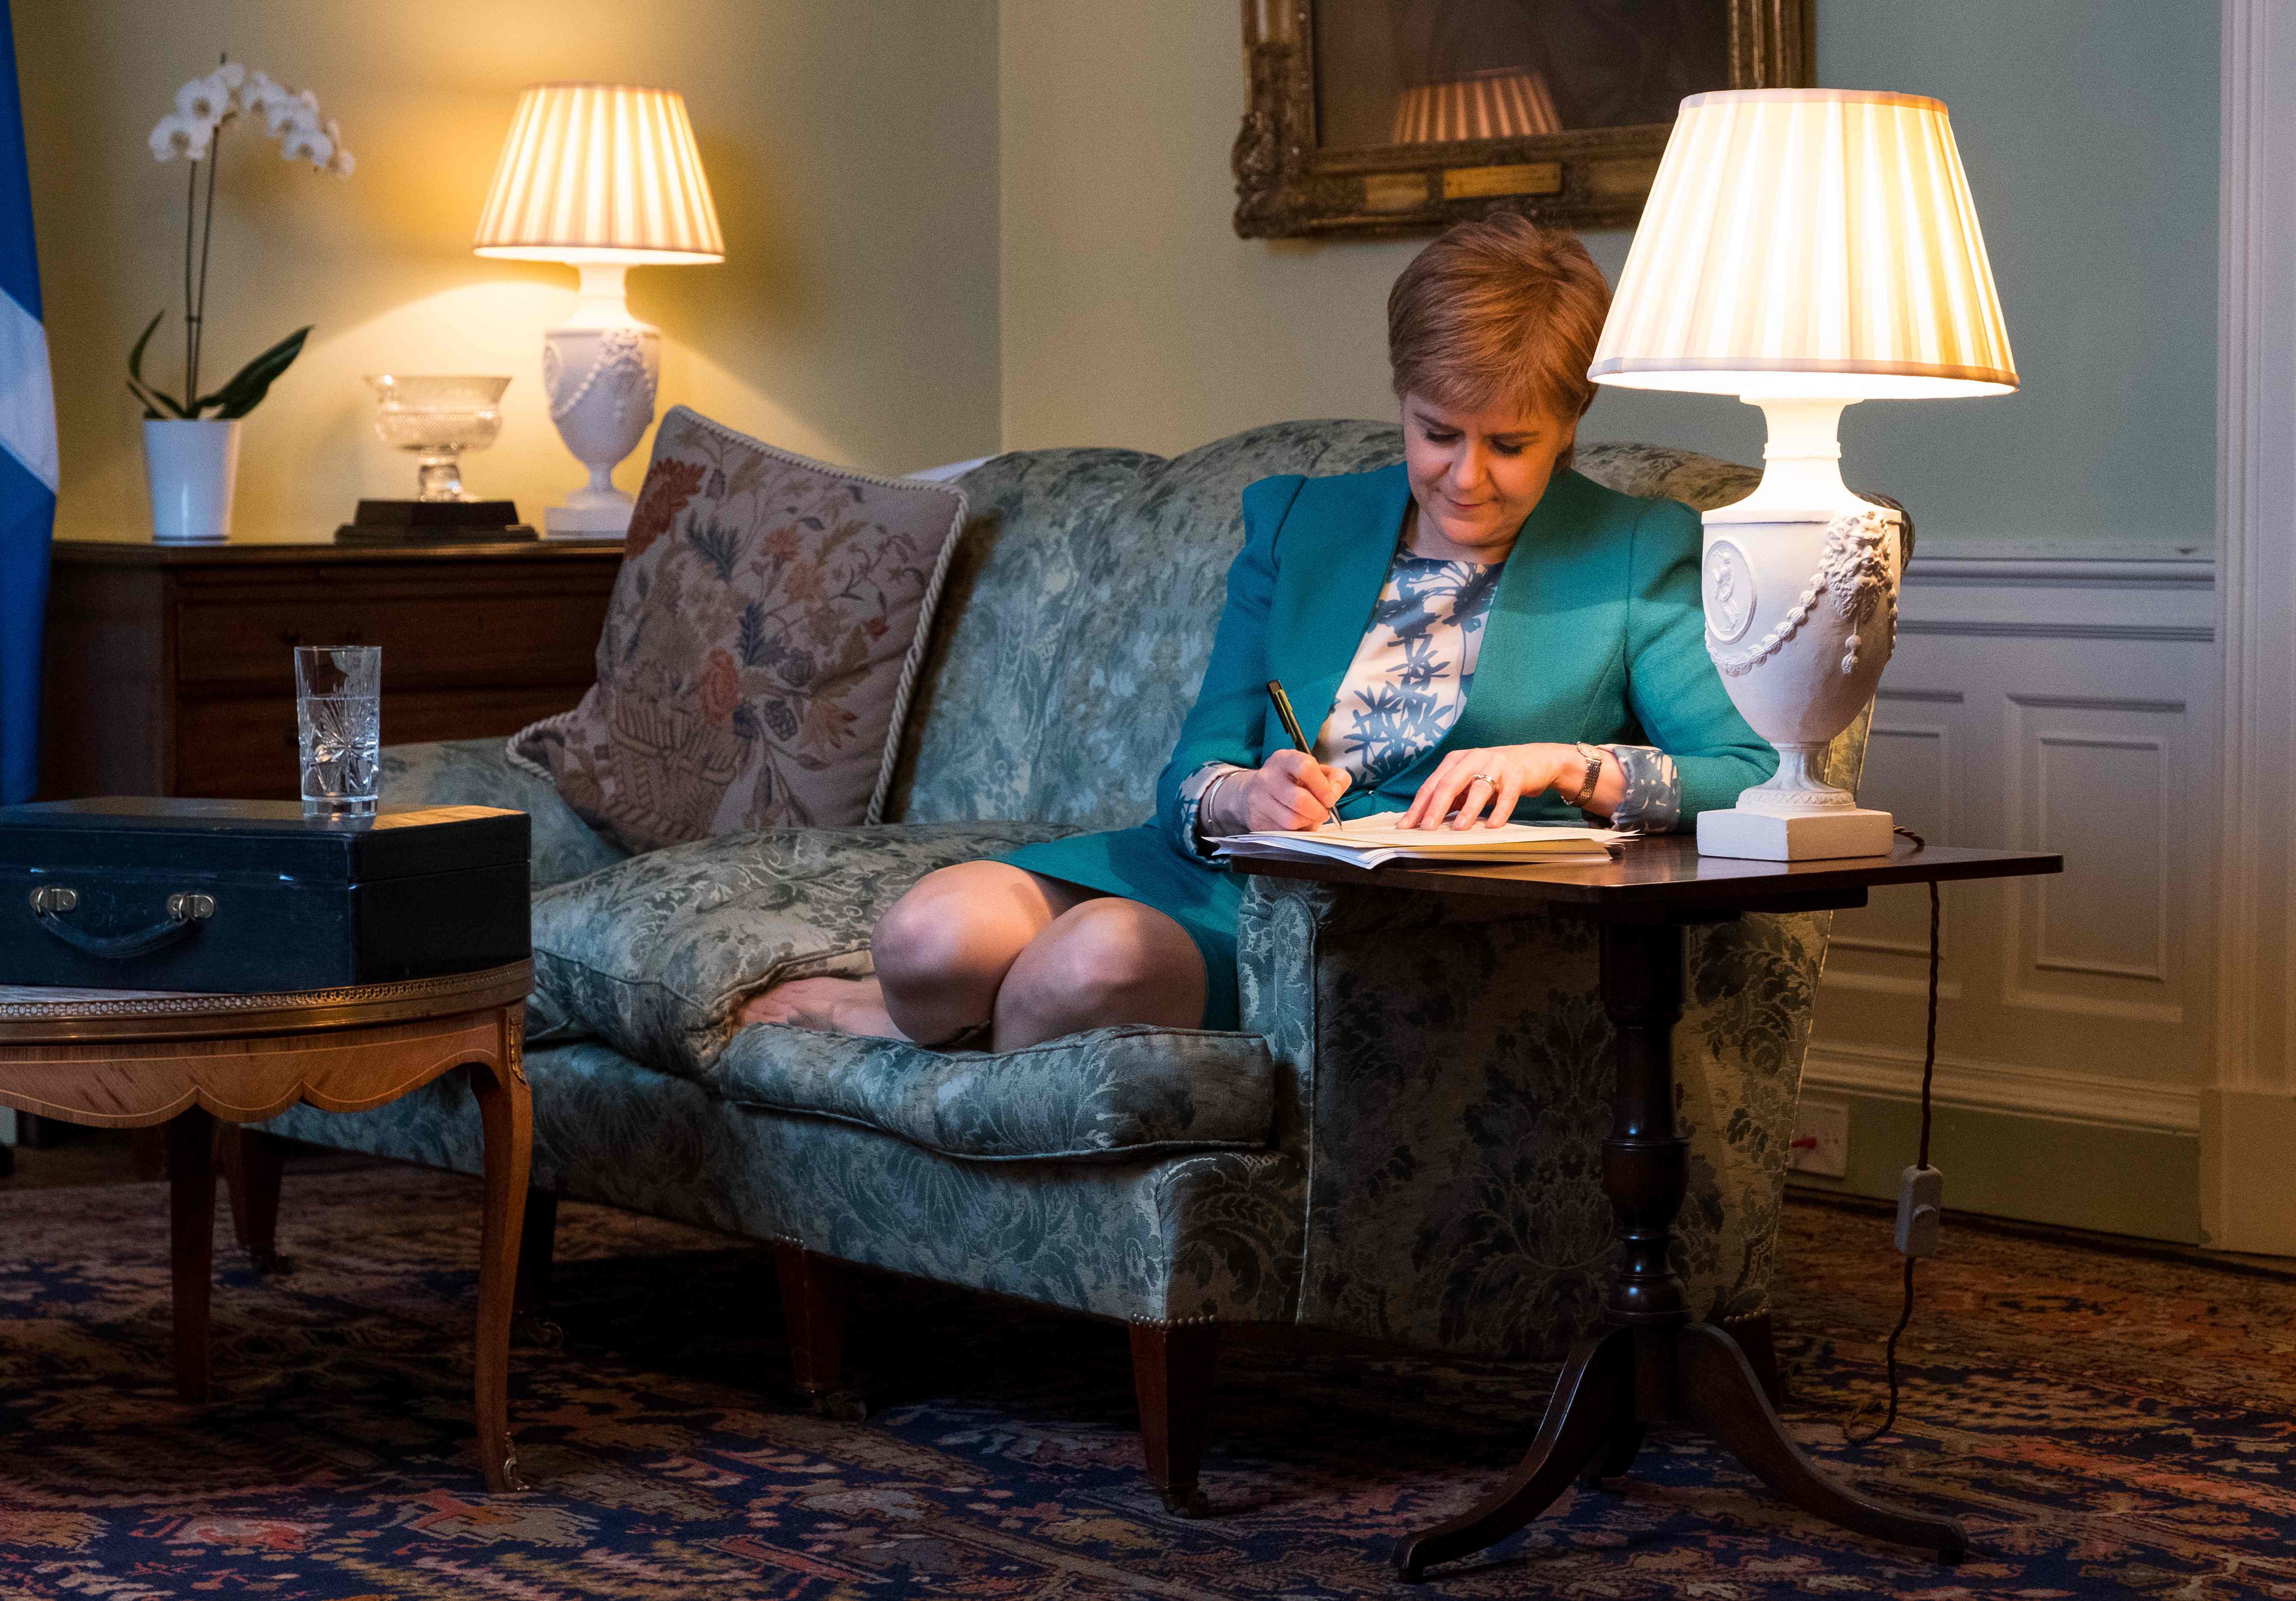 TOPSHOT - A handout picture released by The Scottish Government on March 30, 2017 shows Scotland's First Minister Nicola Sturgeon working on her Section 30 letter to the British Prime Minister Theresa May requesting a second Scottish independence referendum at Bute House, in Edinburgh on March 30, 2017. / AFP PHOTO / The Scottish Government / Stuart Nicol / RESTRICTED TO EDITORIAL USE - MANDATORY CREDIT "AFP PHOTO / THE SCOTTISH GOVERNMENT / STUART NICOL" - NO MARKETING NO ADVERTISING CAMPAIGNS - DISTRIBUTED AS A SERVICE TO CLIENTS / TT / kod 444